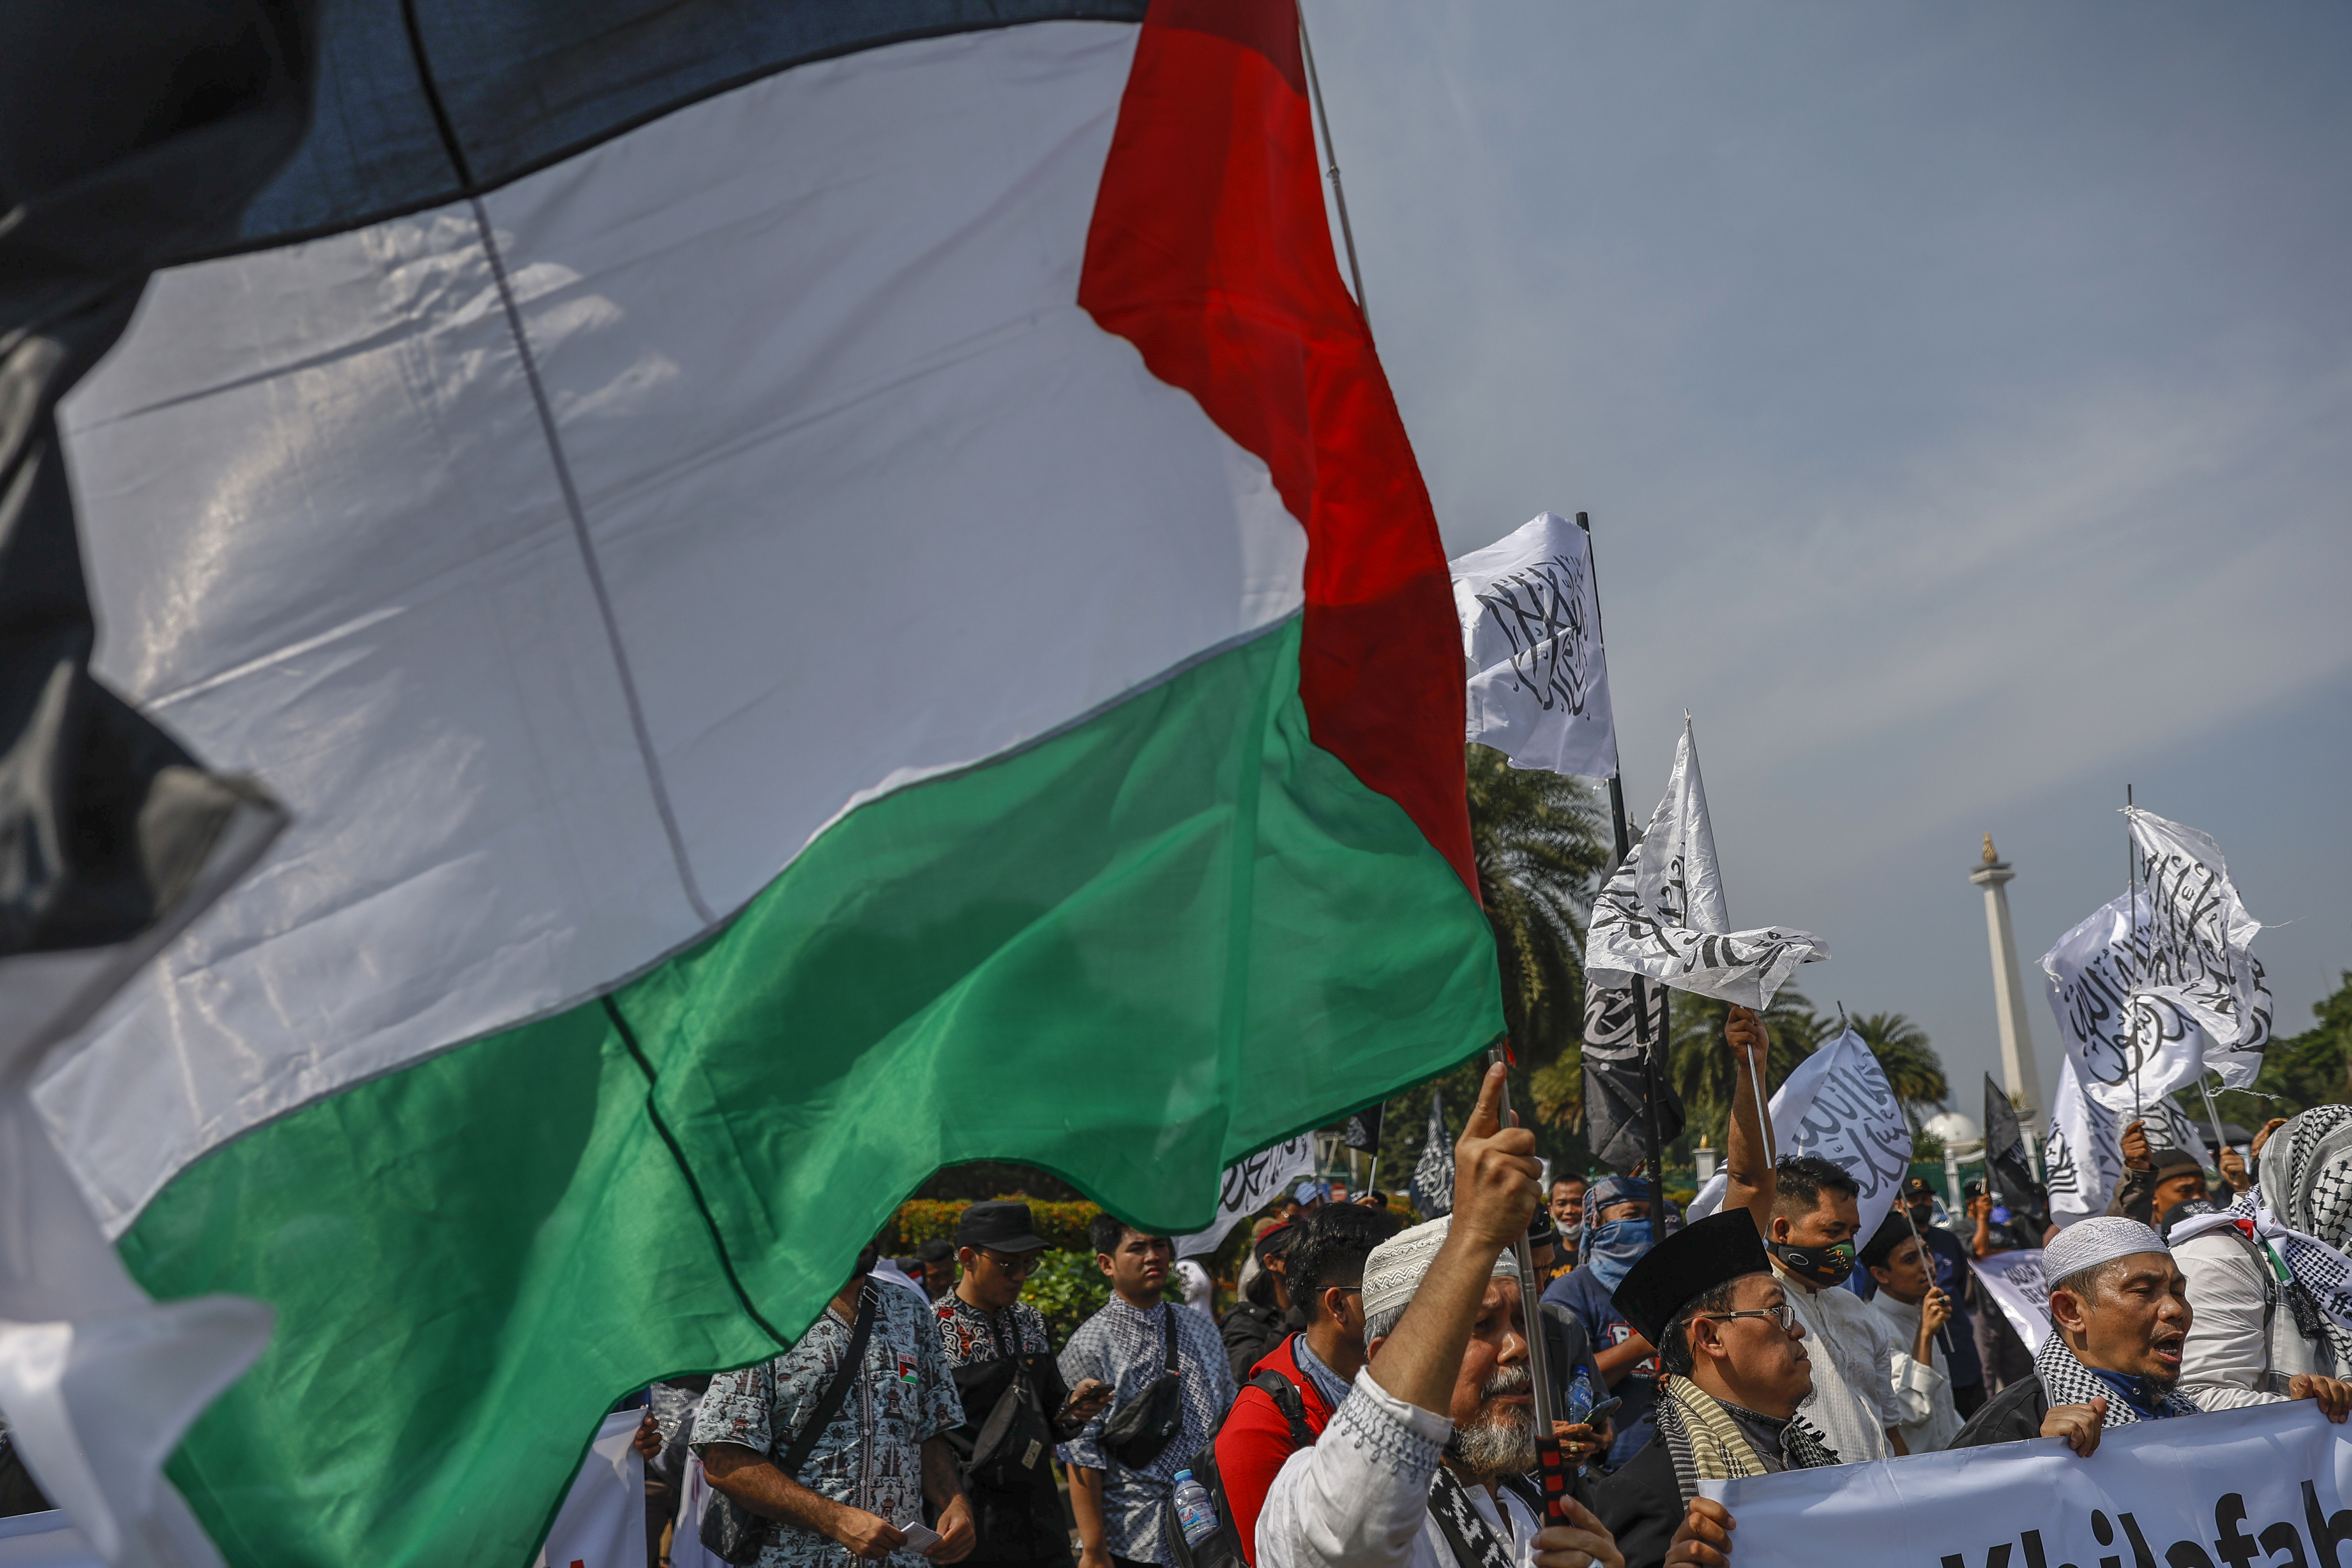 Muslims hold a Palestinian flag and banners as they shout slogans during a rally supporting the Palestinians, in Jakarta